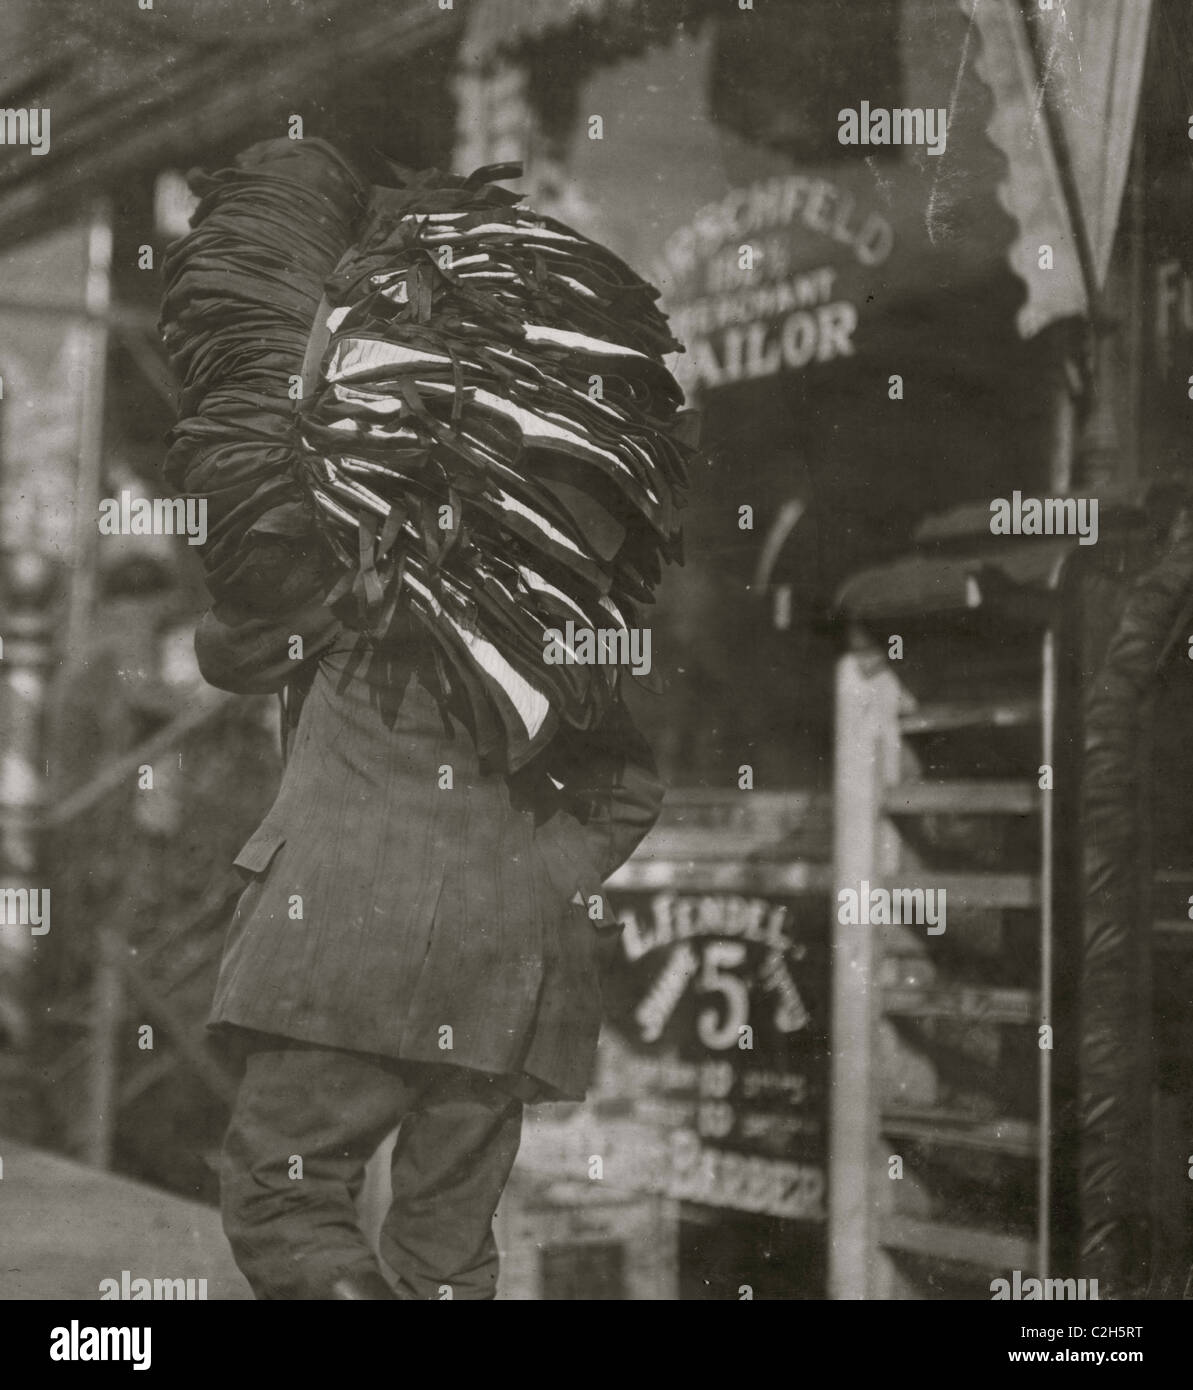 Man loaded down with heavy bundle of vests that he had been carrying for many blocks, stopping to rest, occasionally, when he would drop the bundle down onto whatever boxes or railings were available, even though they were dirty Stock Photo